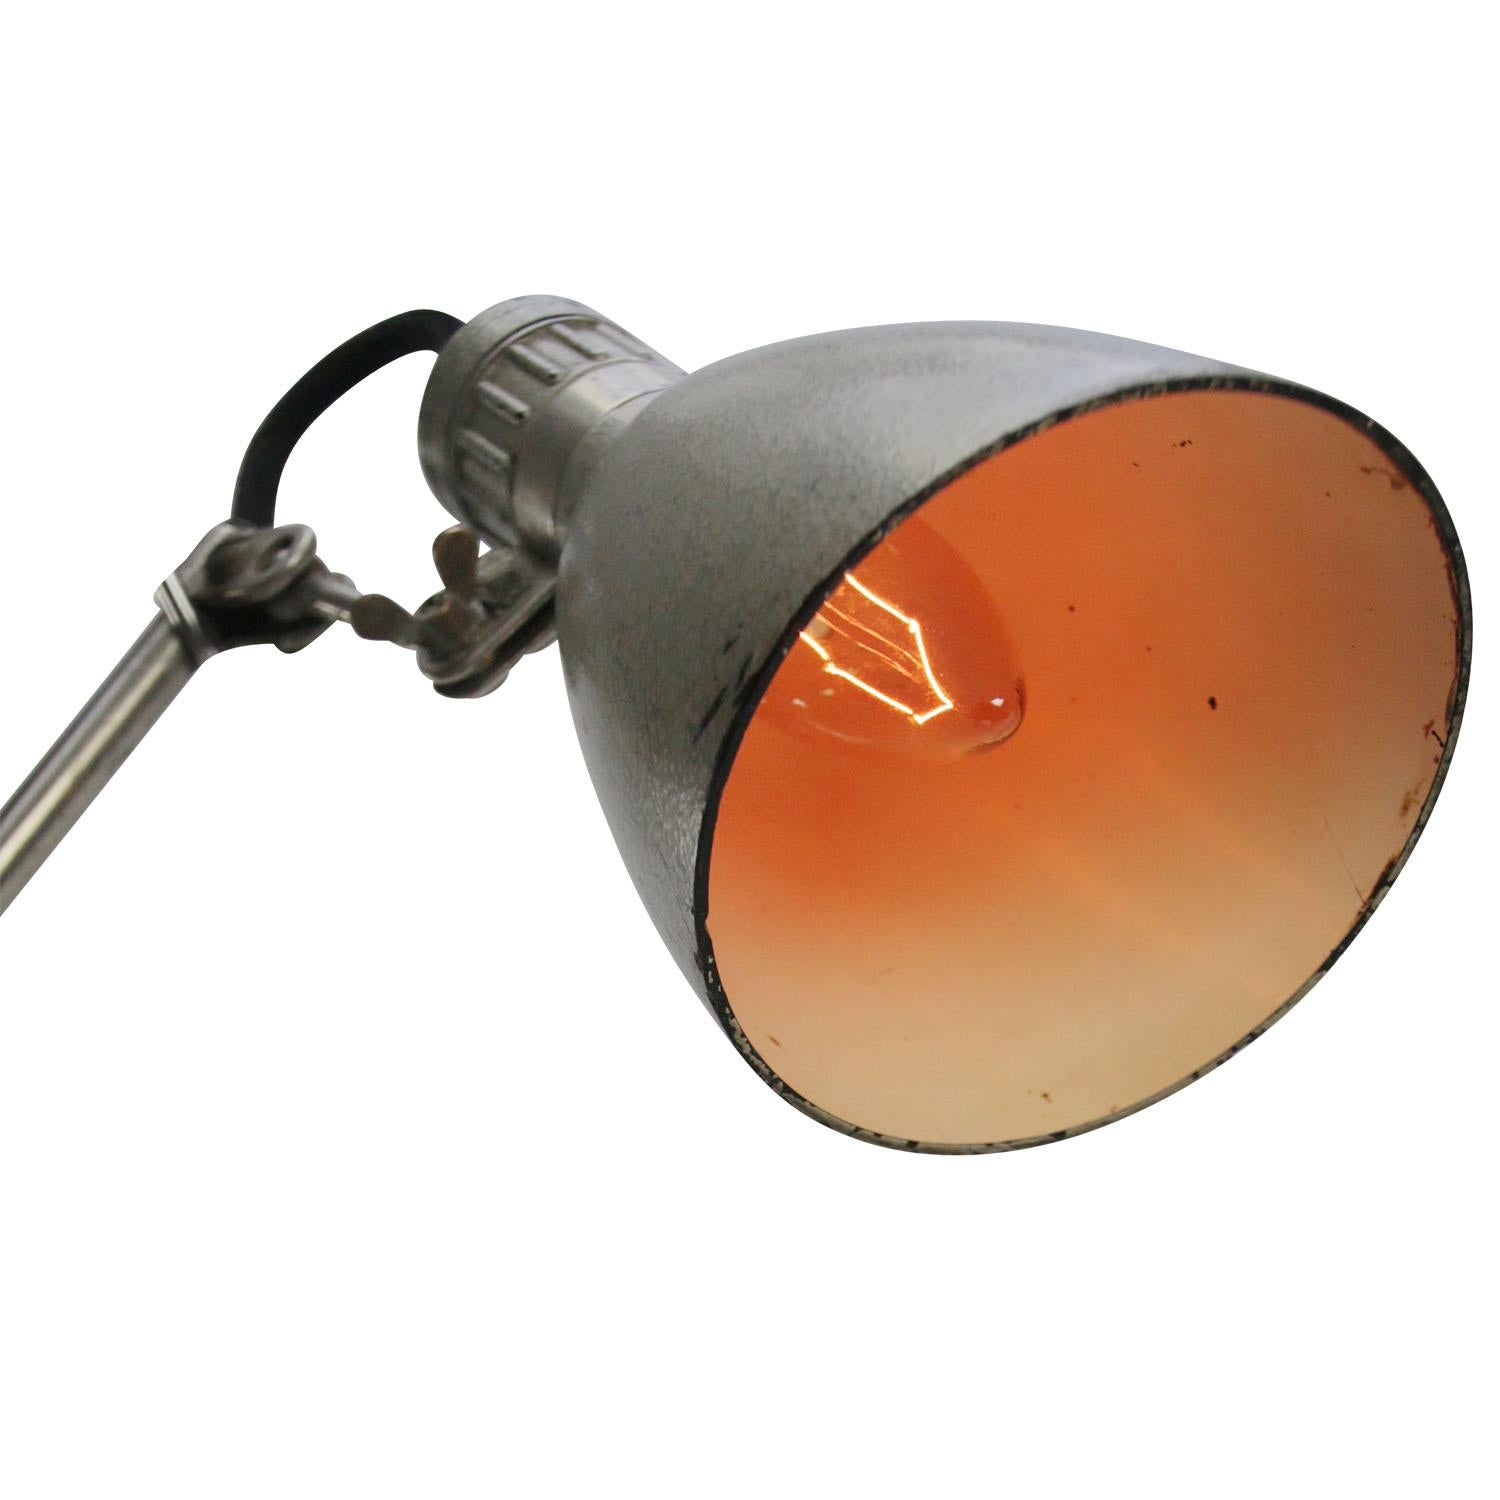 Industrial work light with Bakelite shade by Lumina, France
Including plug and switch in shade

Weight: 1.10 kg / 2.4 lb

E14 screw bulb size

Priced per individual item. All lamps have been made suitable by international standards for